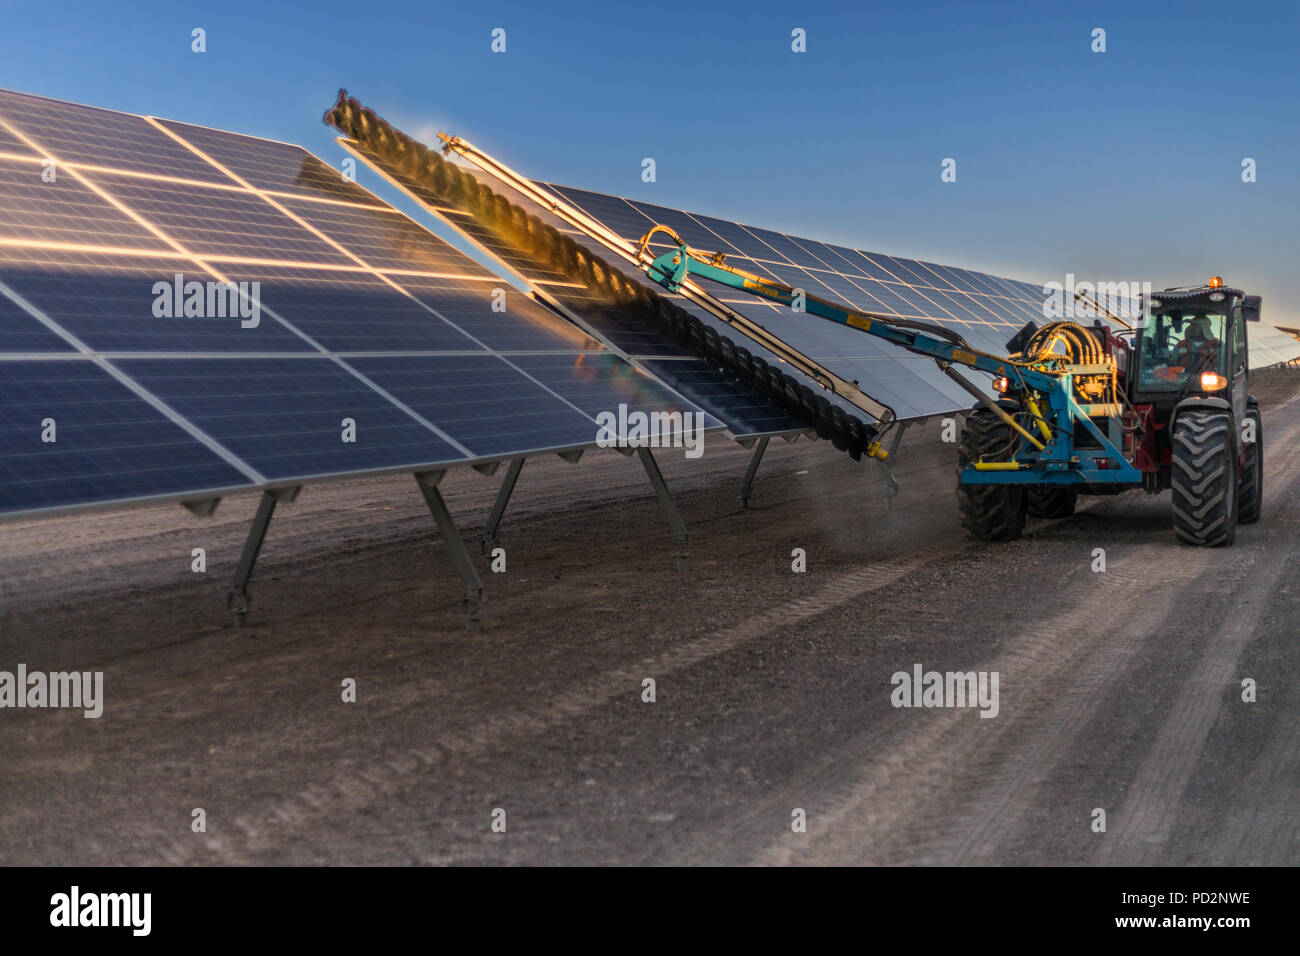 Machine cleaning PV modules, Solar Energy technology to reduce CO2 emissions and the best place for Solar Energy is the Atacama Desert at north Chile Stock Photo